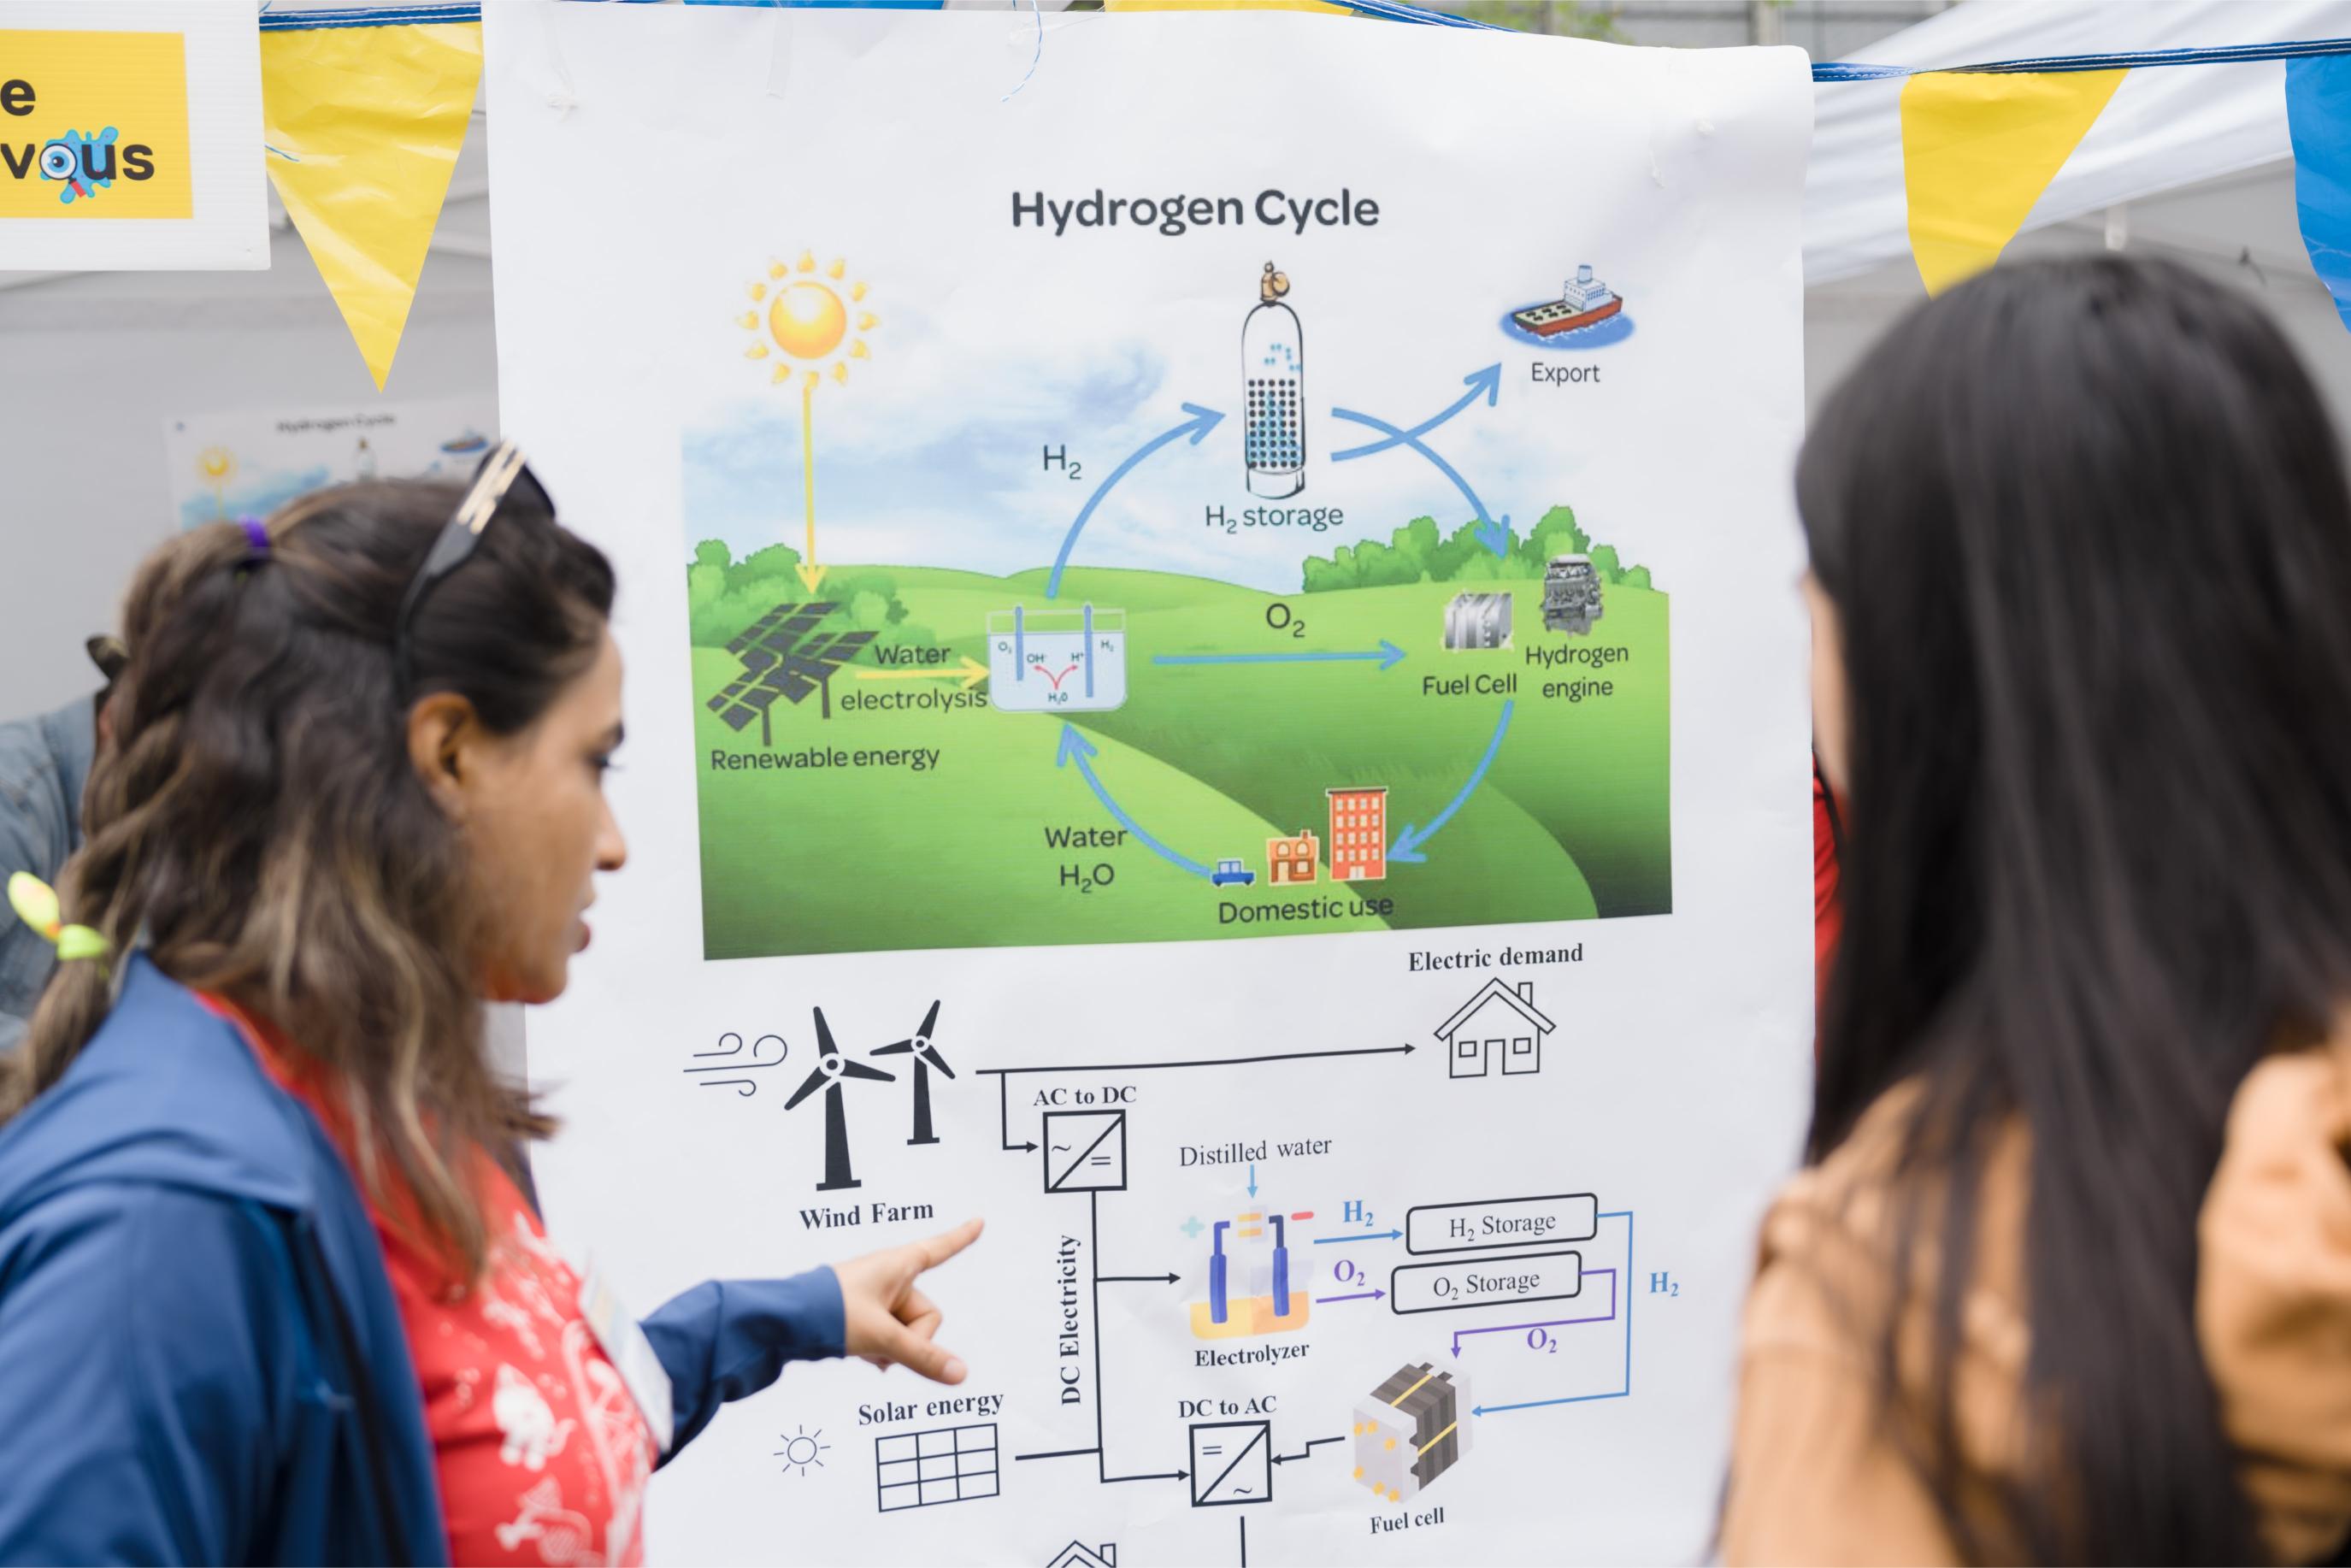 A volunteer showing the hydrogen cycle to the participants